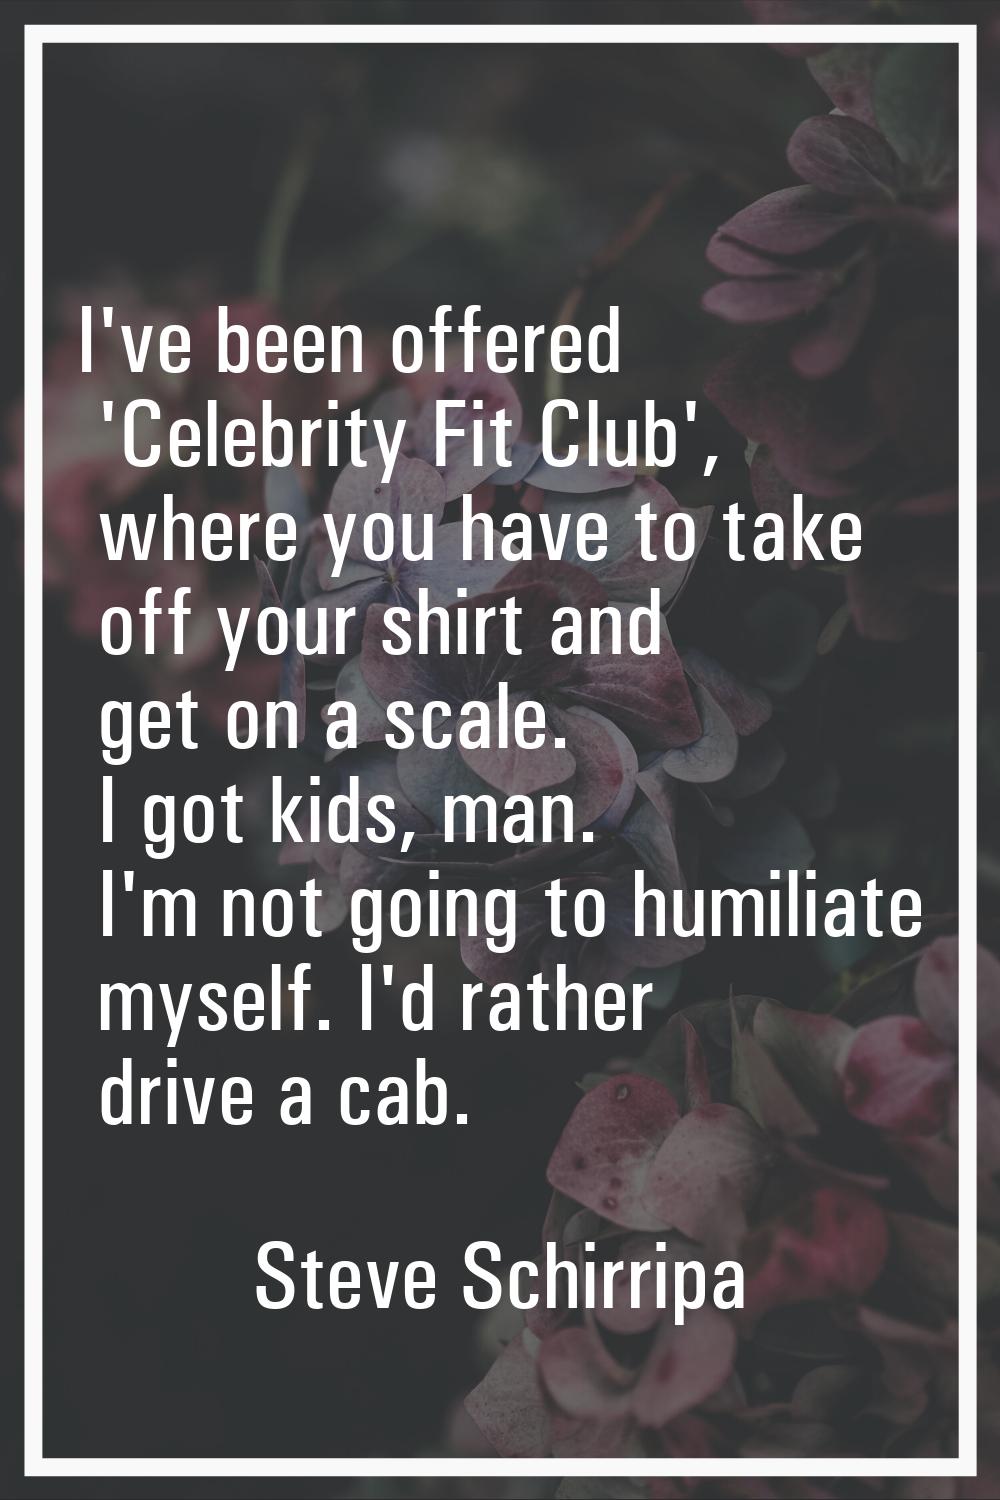 I've been offered 'Celebrity Fit Club', where you have to take off your shirt and get on a scale. I